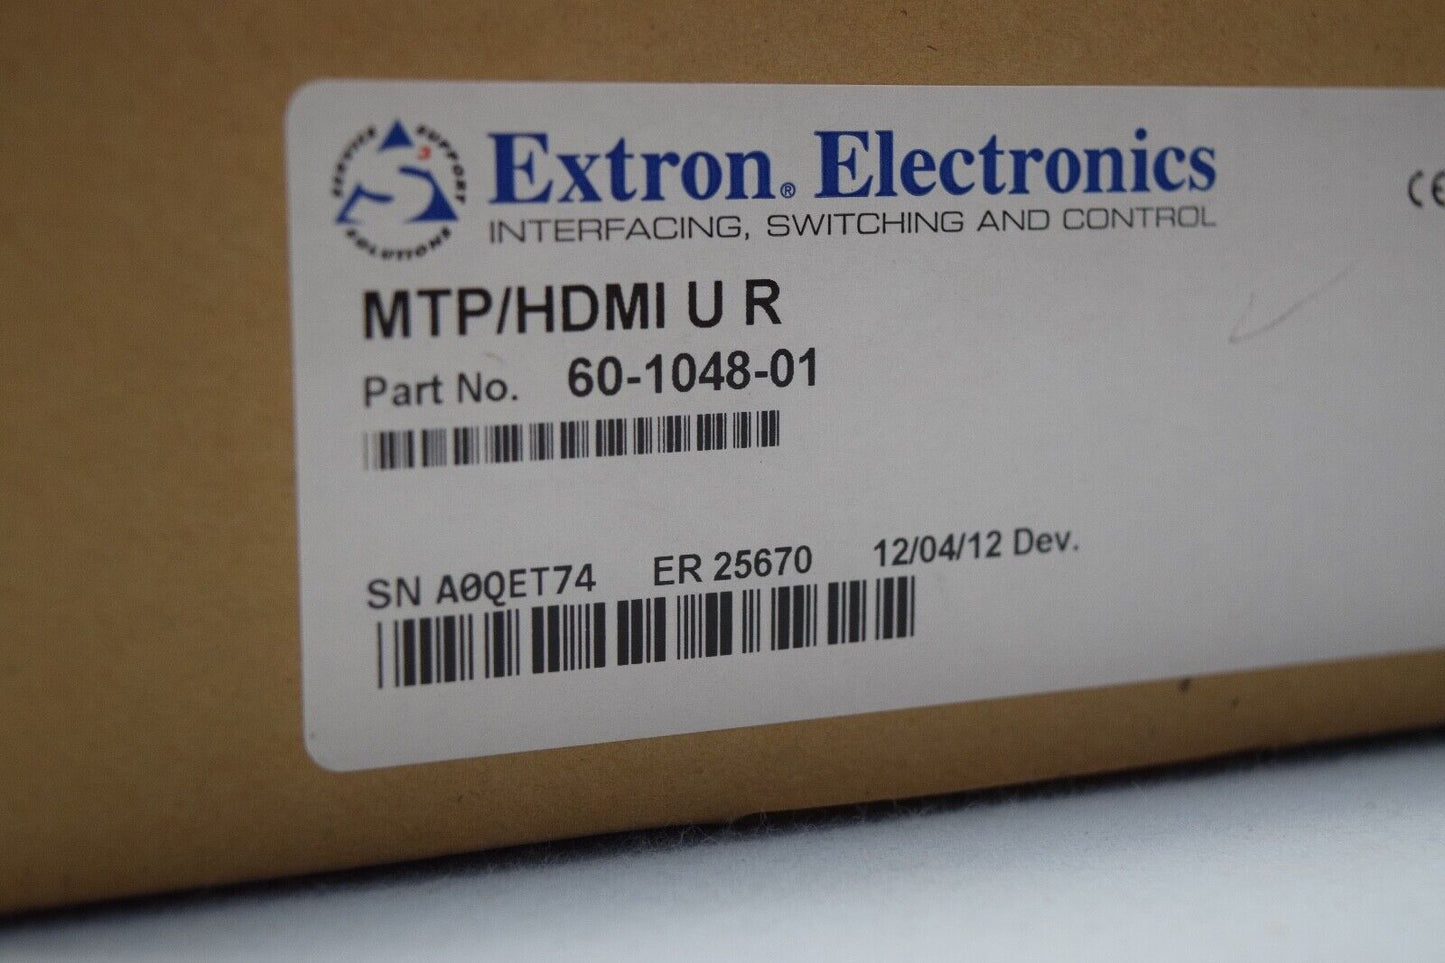 Extron 60-1048-01 MTP/HDMI U R Universal Twisted Pair Receiver